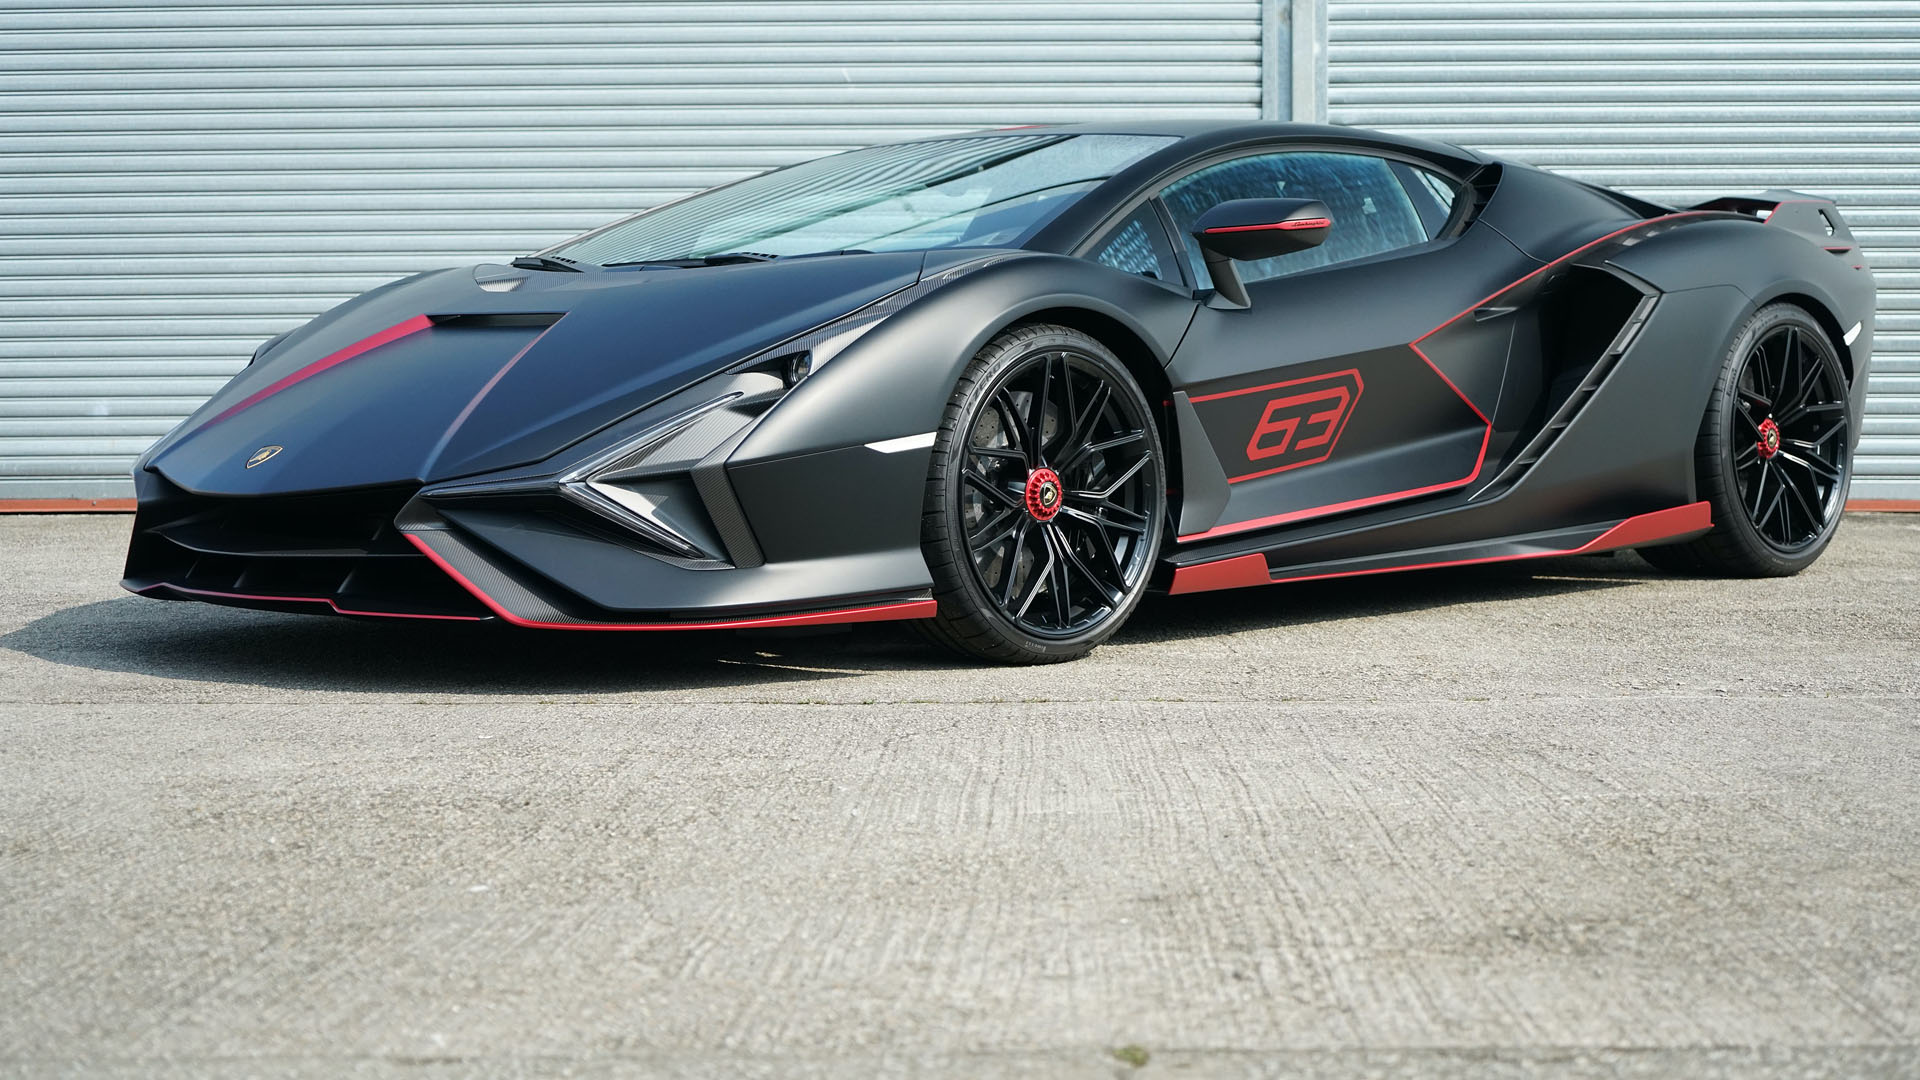 What Do You Think Of This Carbon Lamborghini Sian?